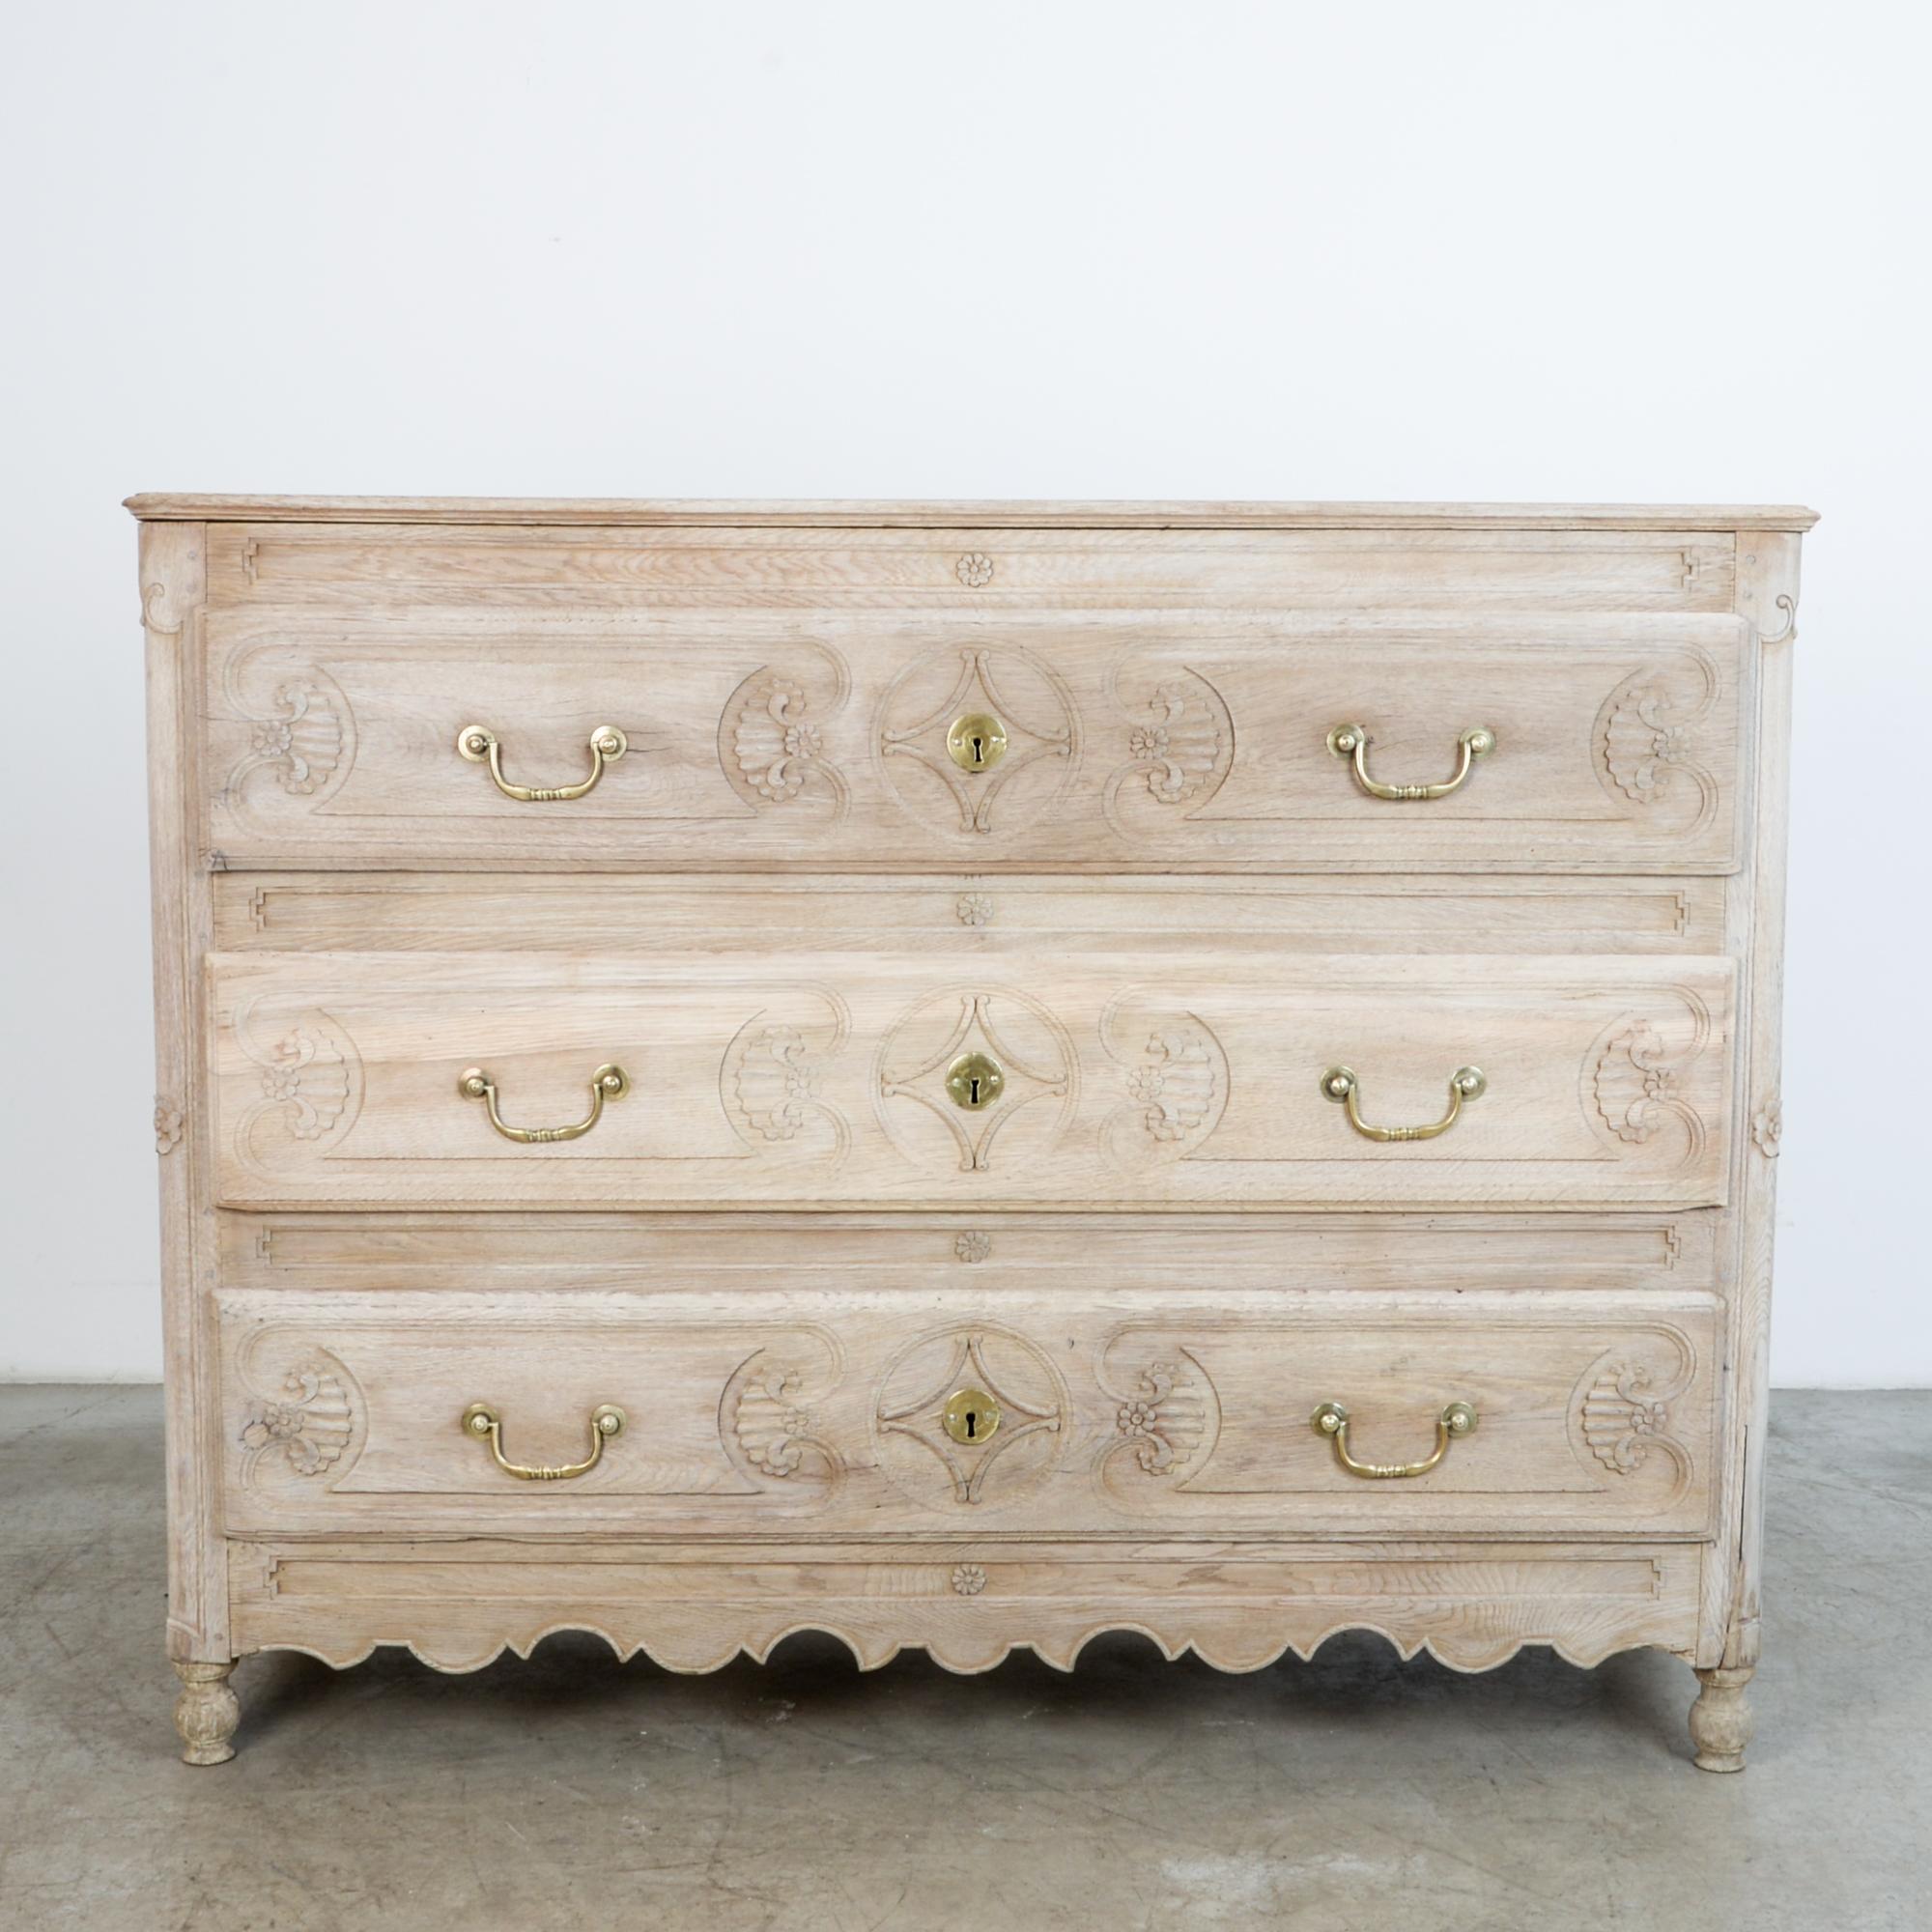 From circa 1820 France, with 3 locking drawers, a sturdy drawer cabinet in oak. Finished with a clear wax and oil blend, this chest of drawers is clean and prepared for your interior. Featuring intriguing period details, characteristic shape and